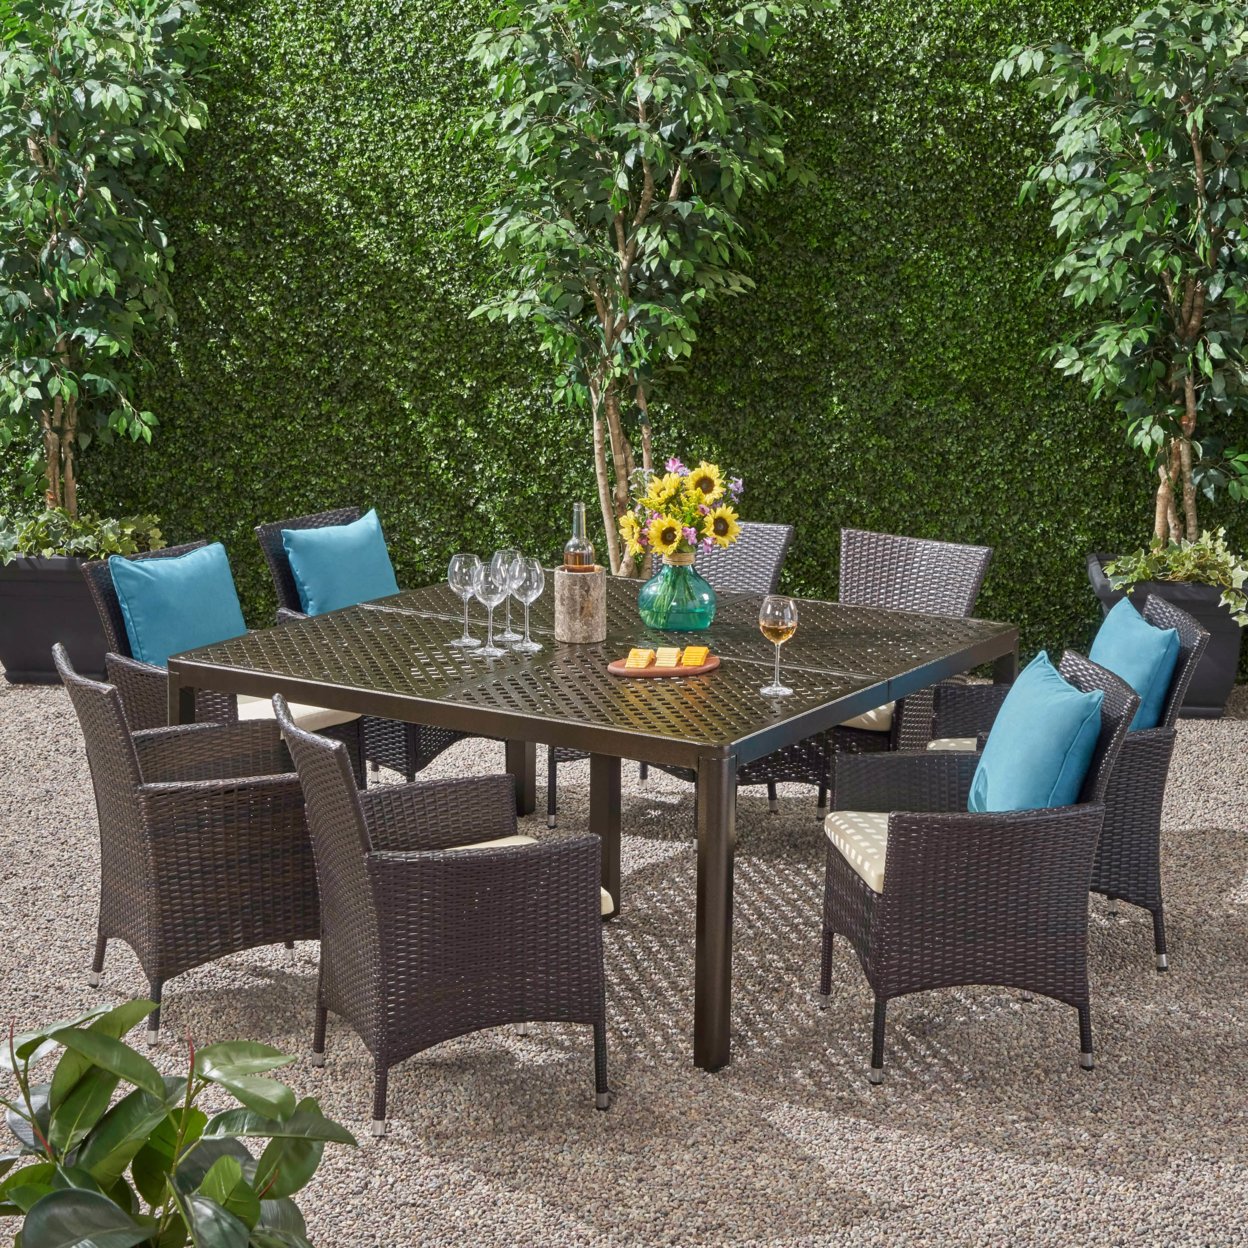 Nelly Outdoor Aluminum And Wicker 8 Seater Dining Set - Gloss Black + Multibrown + Beige